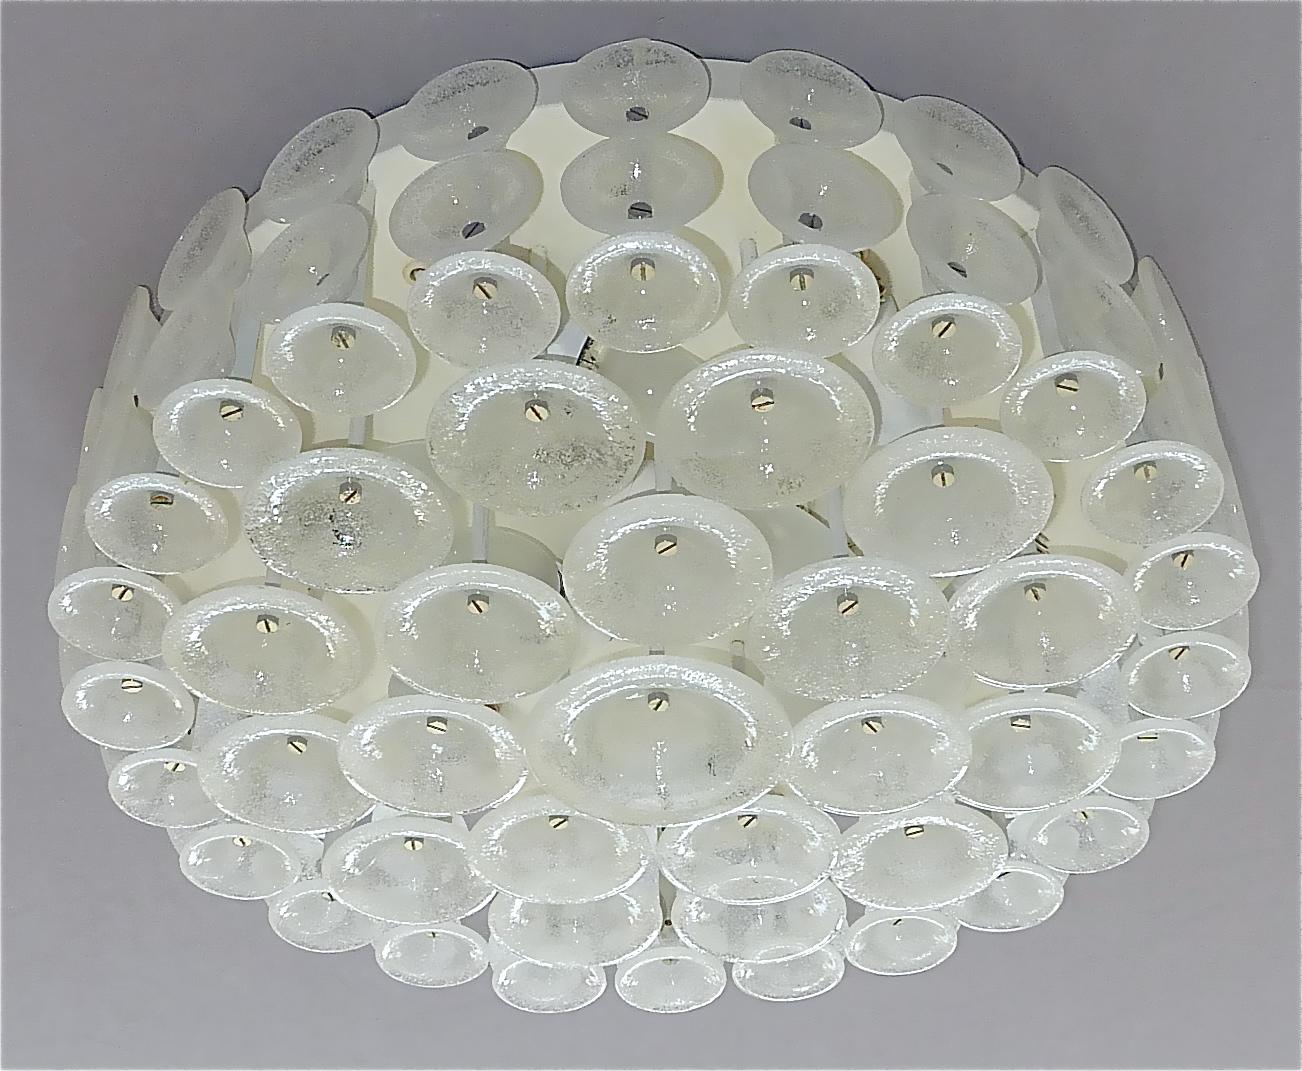 Sculptural Op Art Pop Art flush mount chandelier most probably made by Carlo Nason for Mazzega or Vistosi, Italy, 1960s. The amazing Midcentury light is made of hand-crafted Murano glass bowl discs in pulegoso glass technique in three different